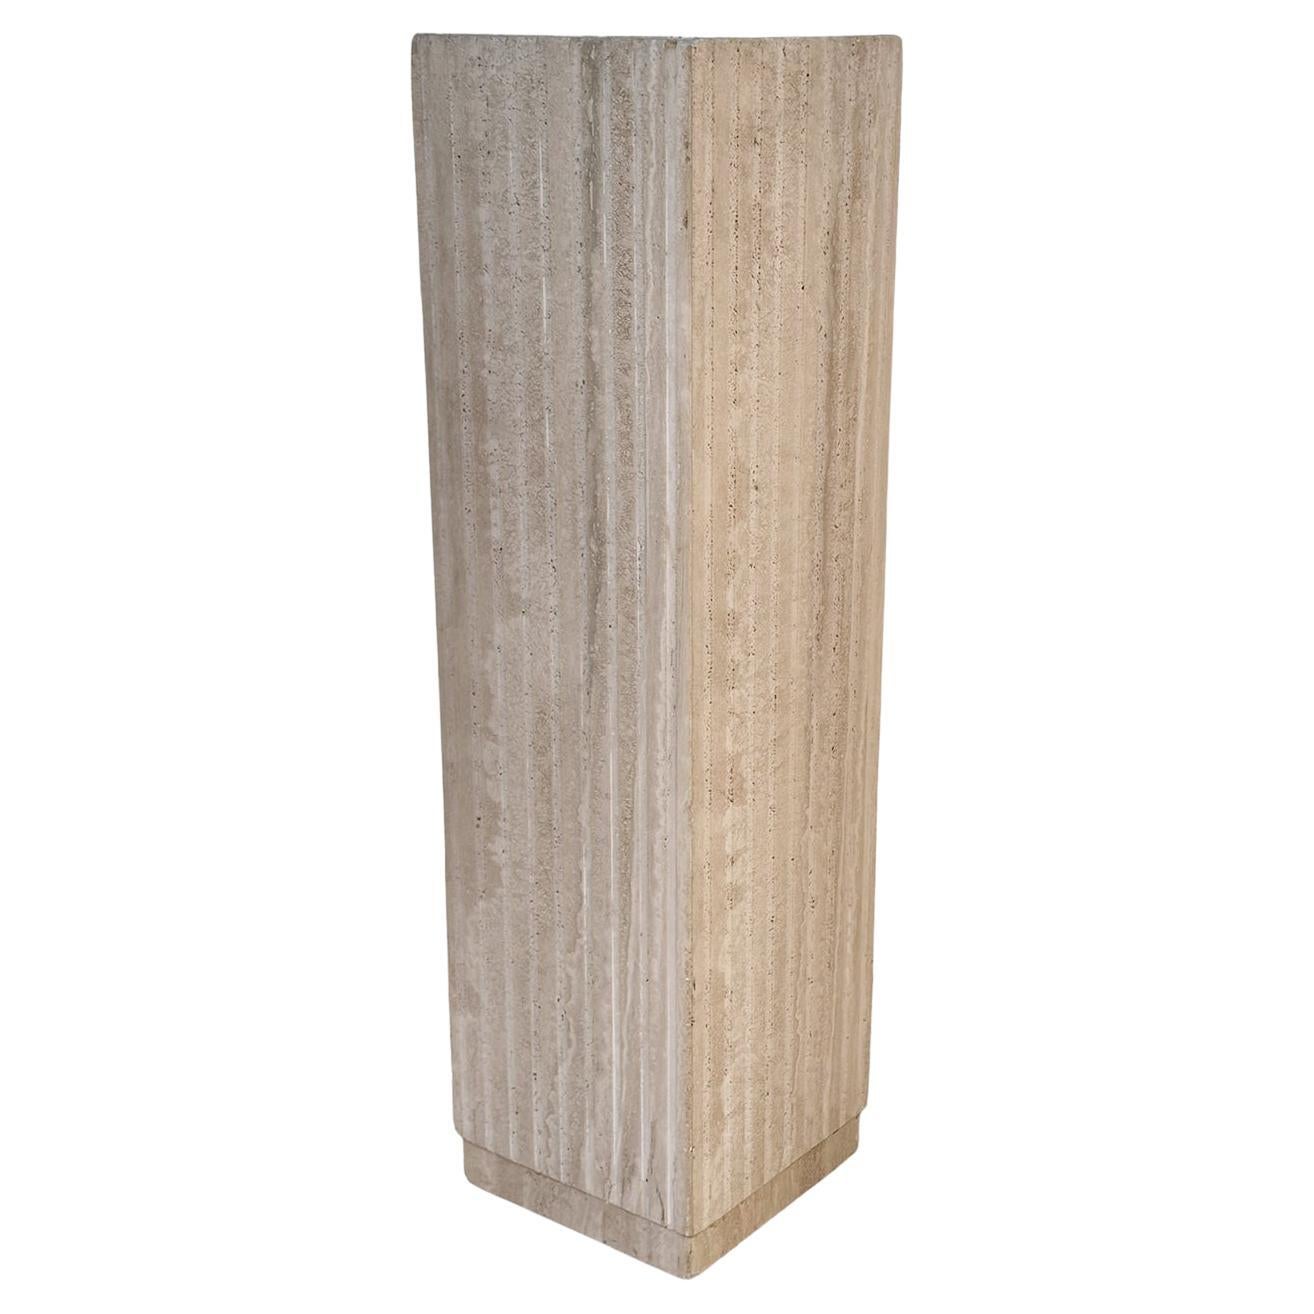 Tall Midcentury Italian Post Modern Fluted Travertine Marble Pedestal Table For Sale